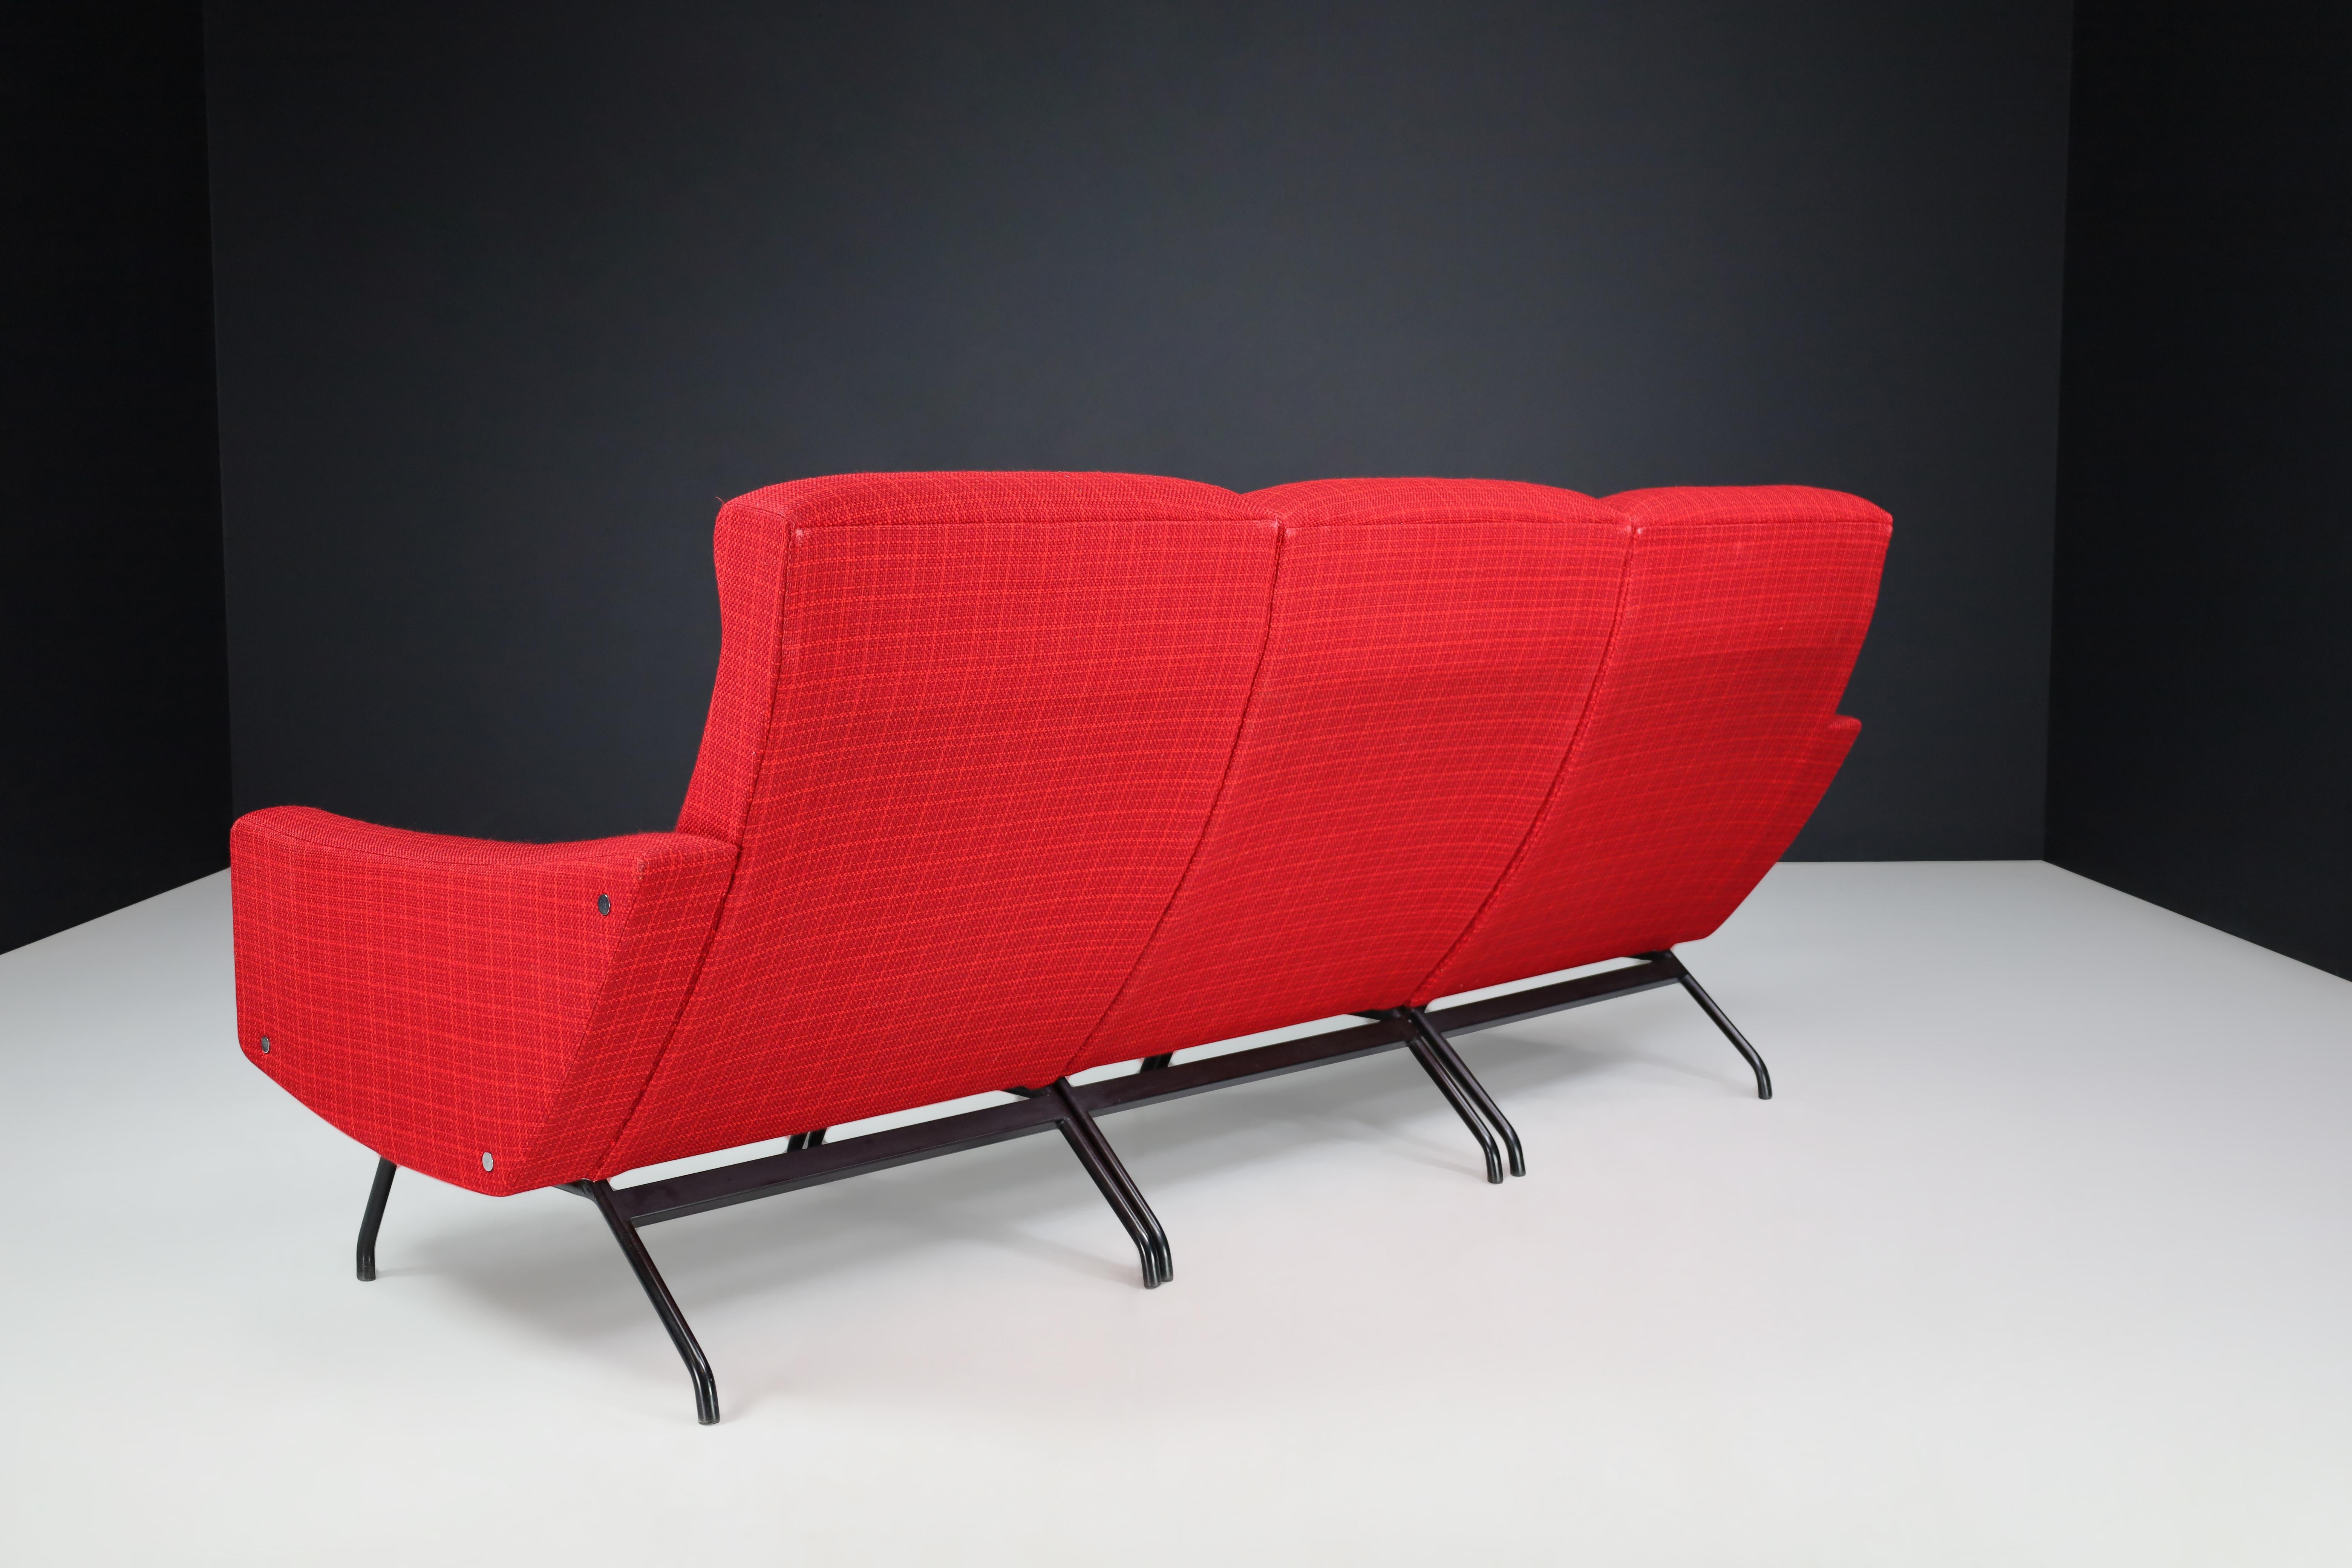 Steel Joseph-André Motte Sectional Sofa Seat in Red Original Upholstery France, 1950s For Sale